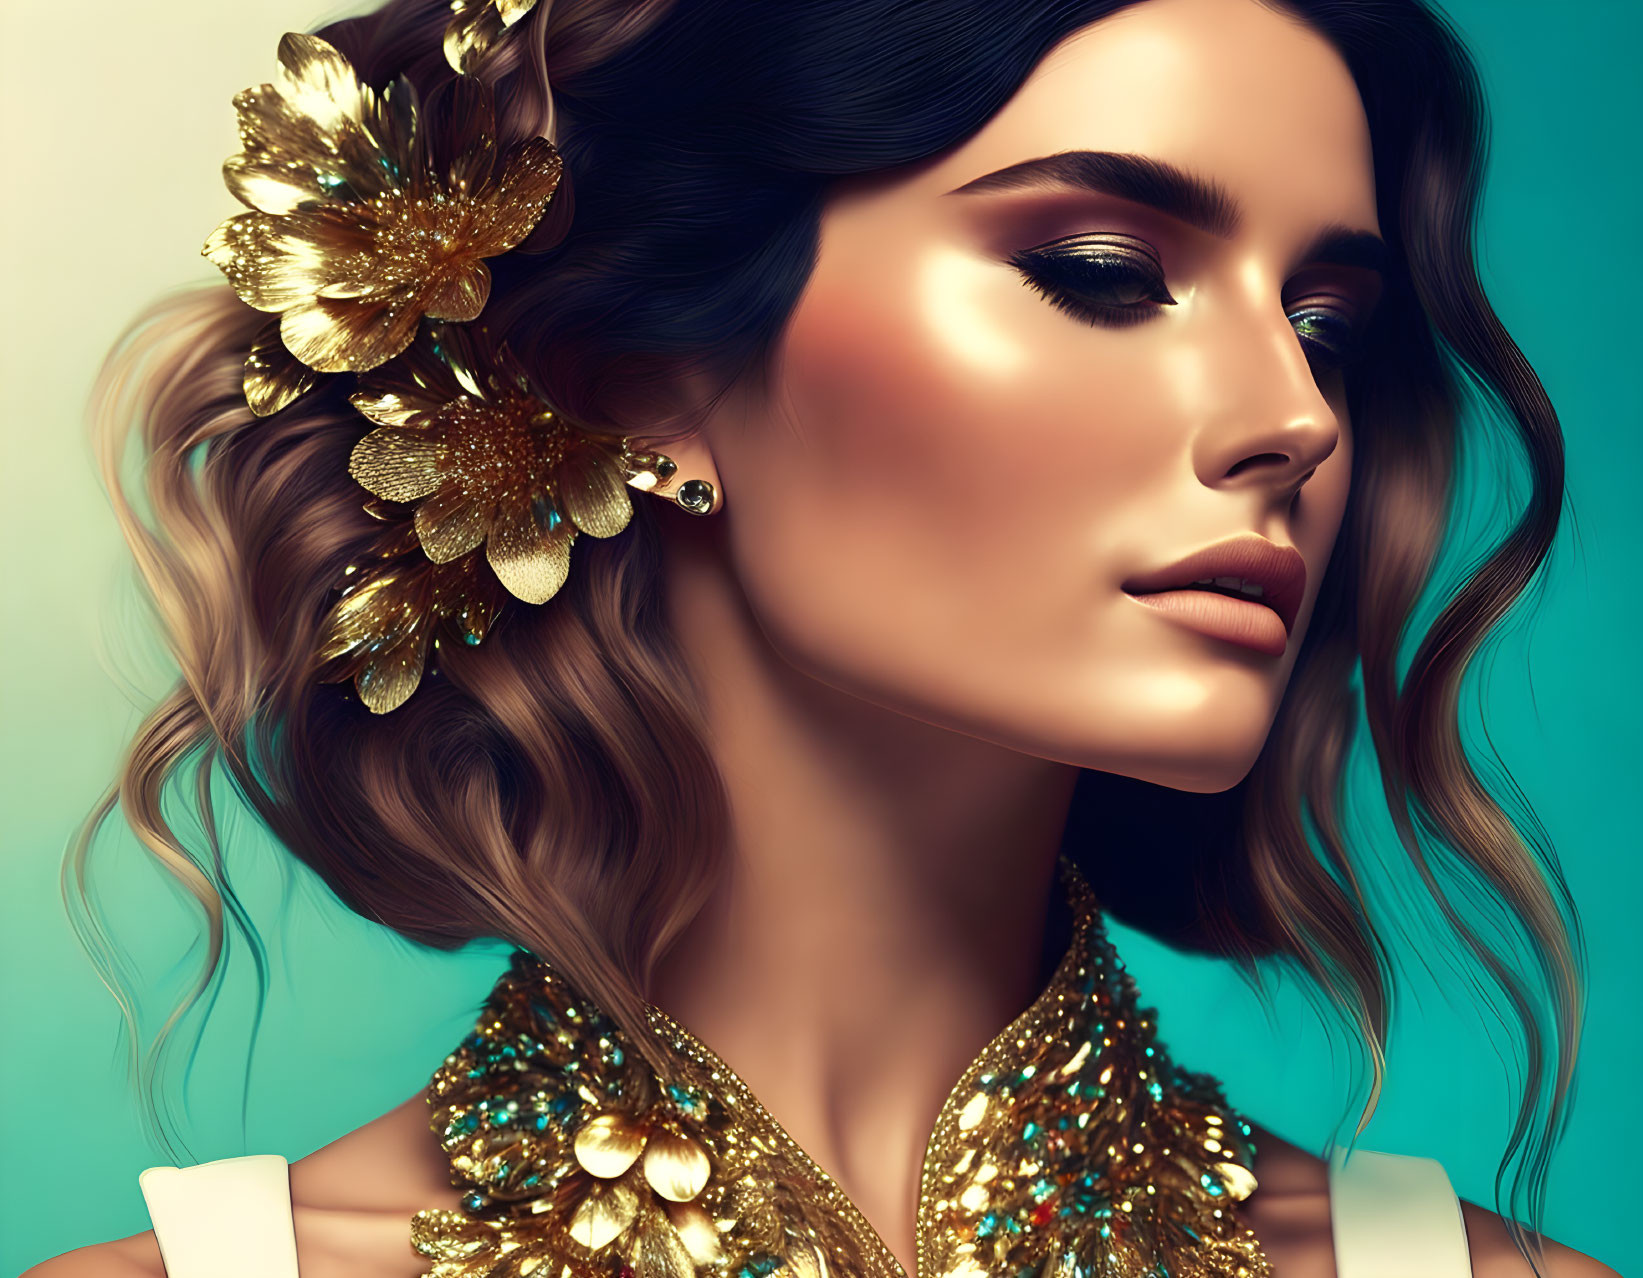 Woman with Wavy Hair, Gold Flowers, Radiant Skin, Bold Makeup on Teal Background